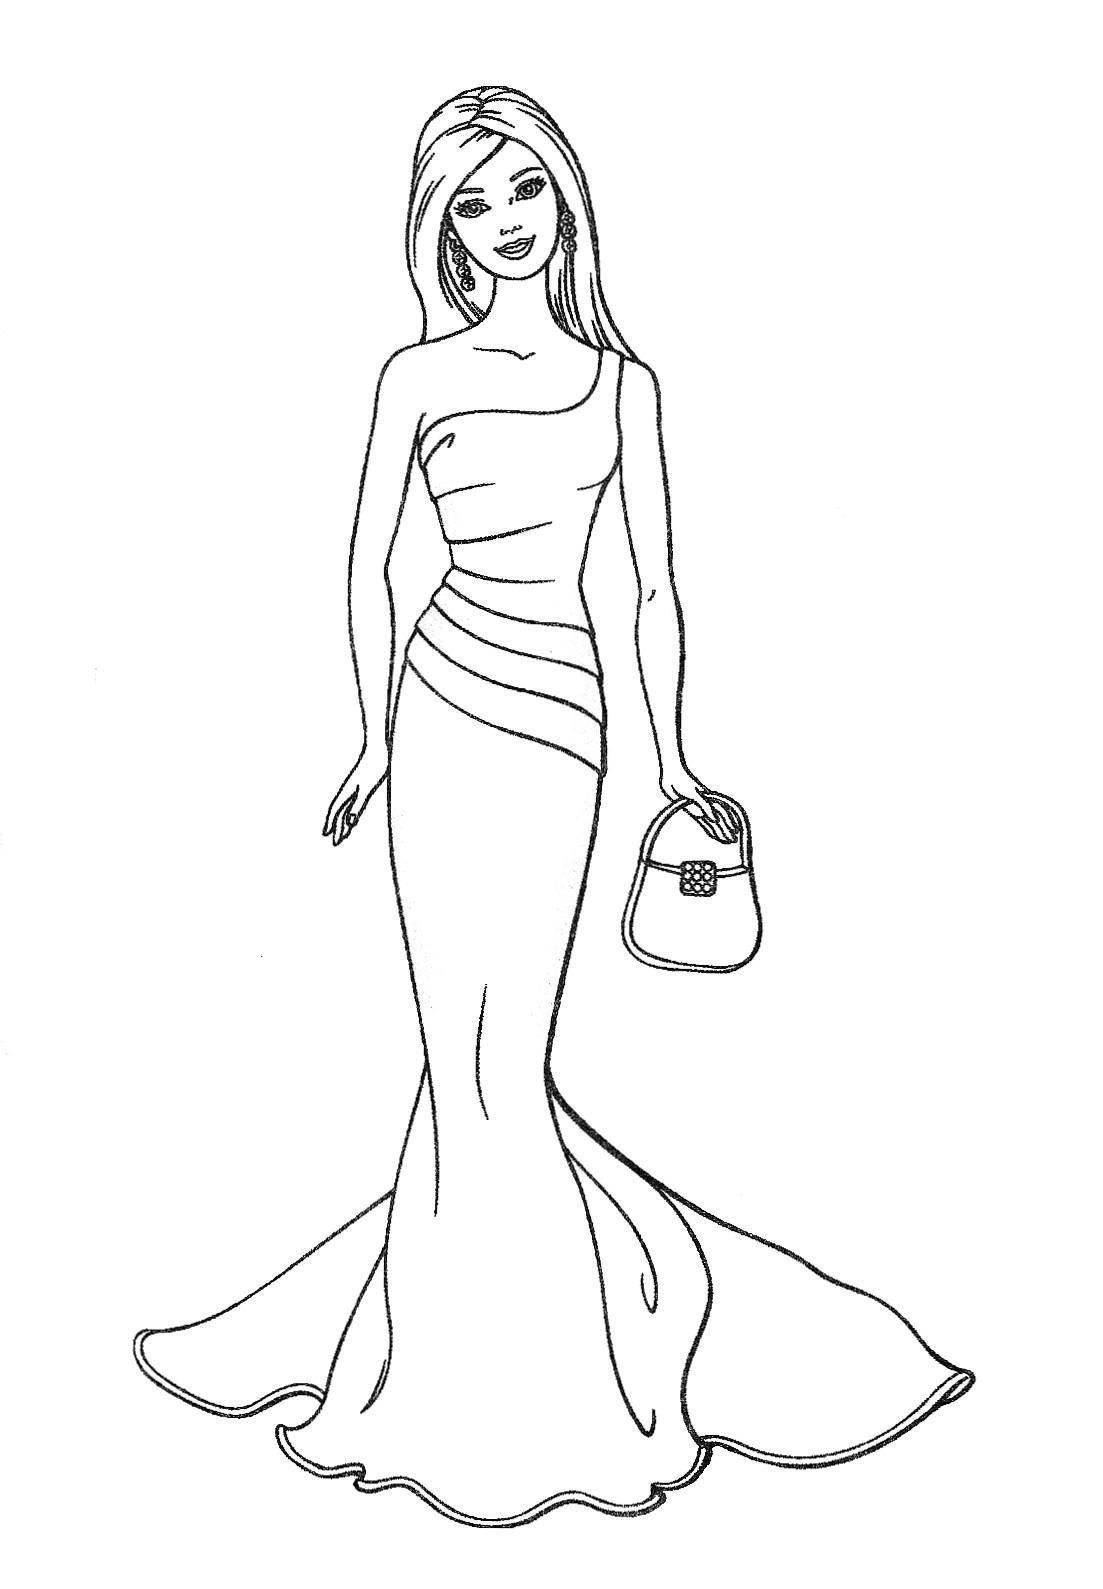 Free Barbie Cartoon Coloring Pages, Download Free Barbie Cartoon